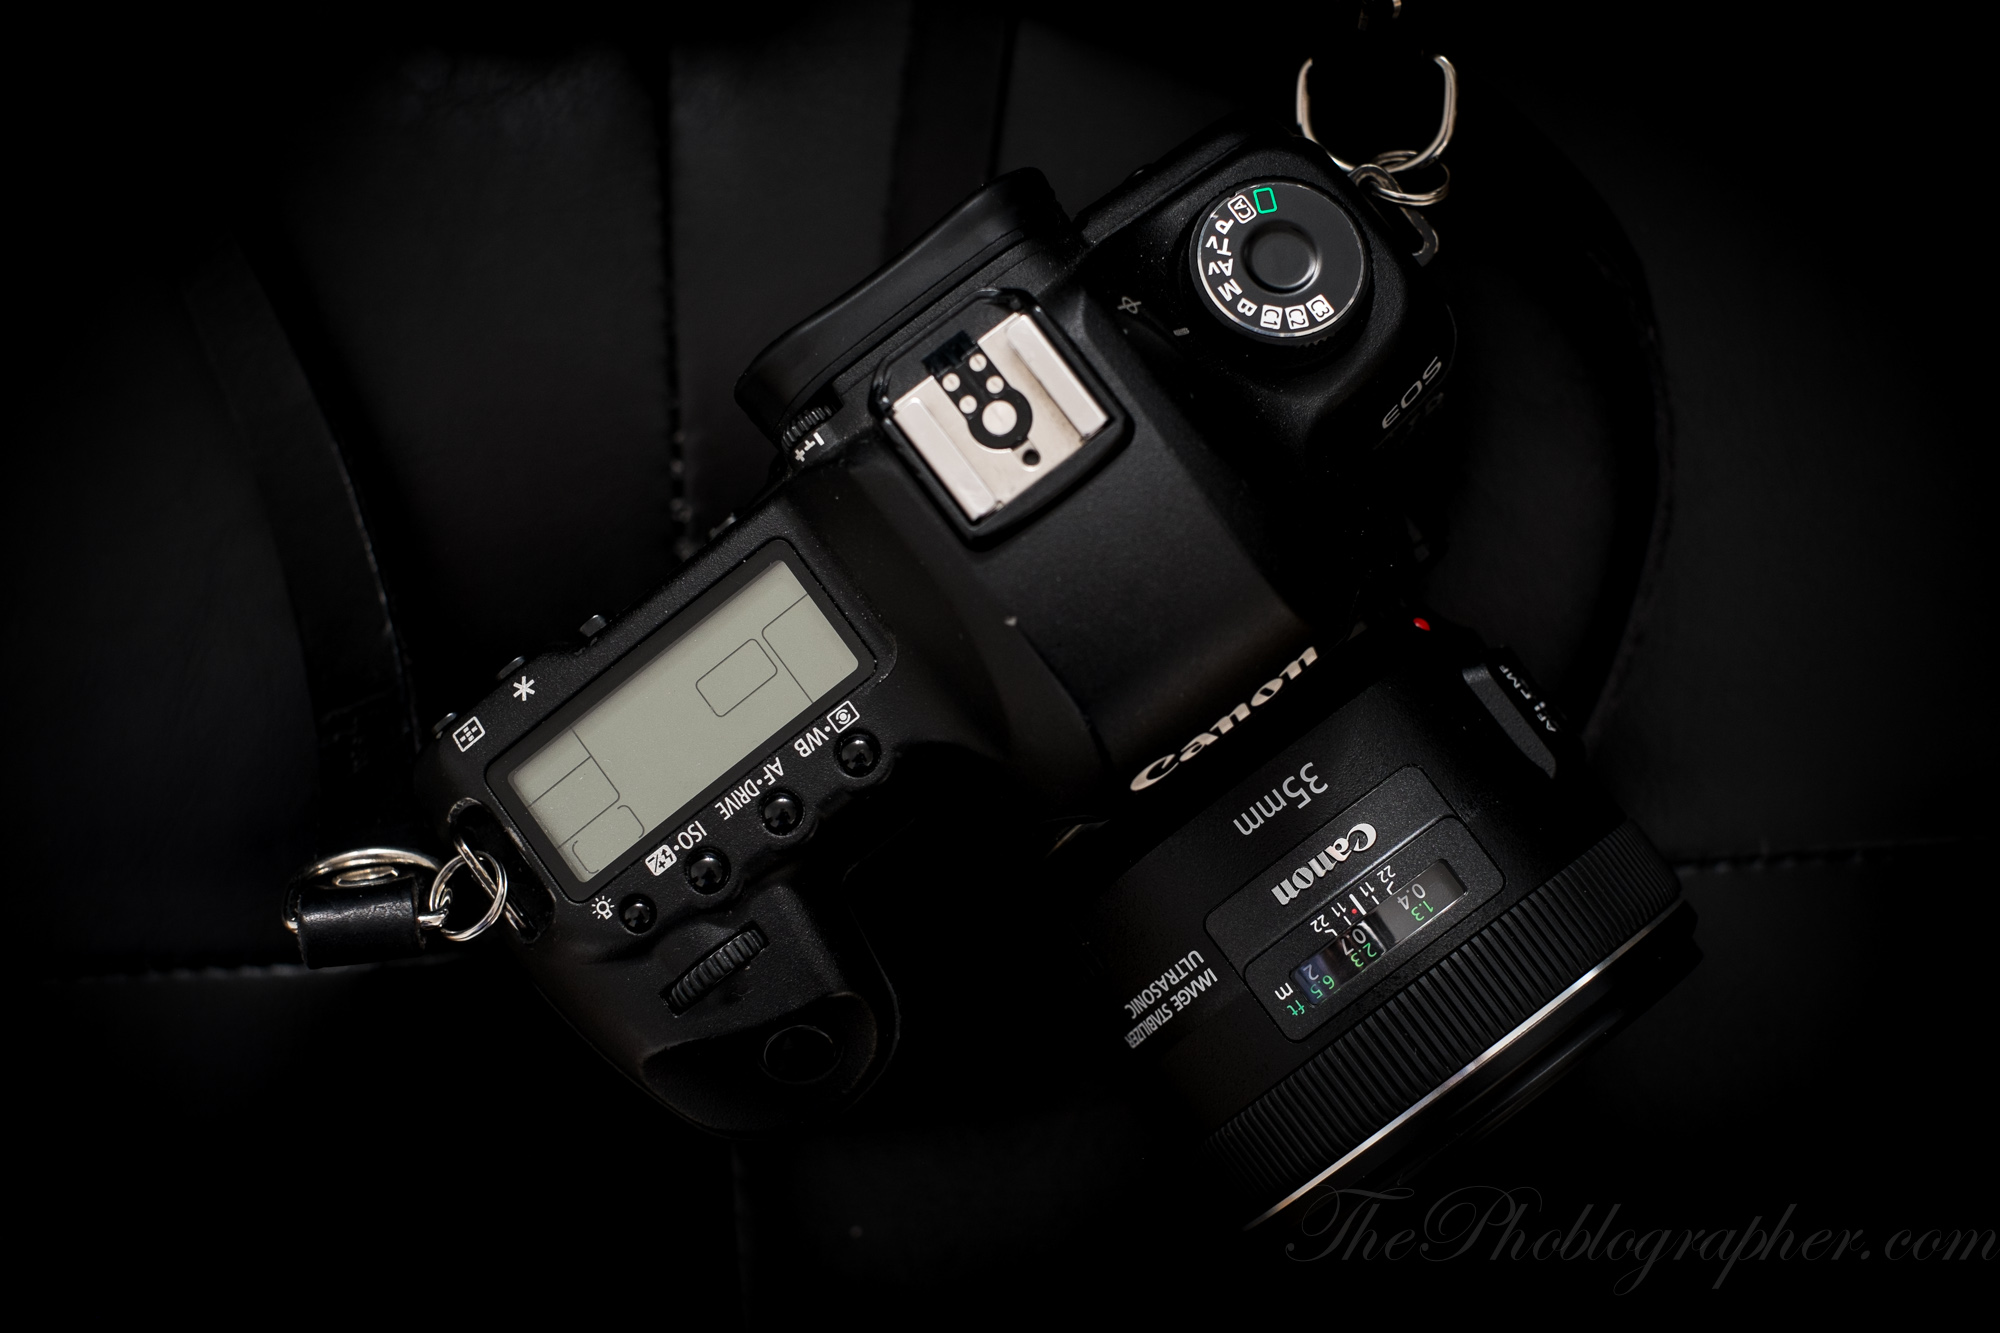 Chris-Gampat-The-Phoblographer-Canon-35mm-f2-IS-product-images-1-of-7ISO-2001-60-sec-at-f-4.0